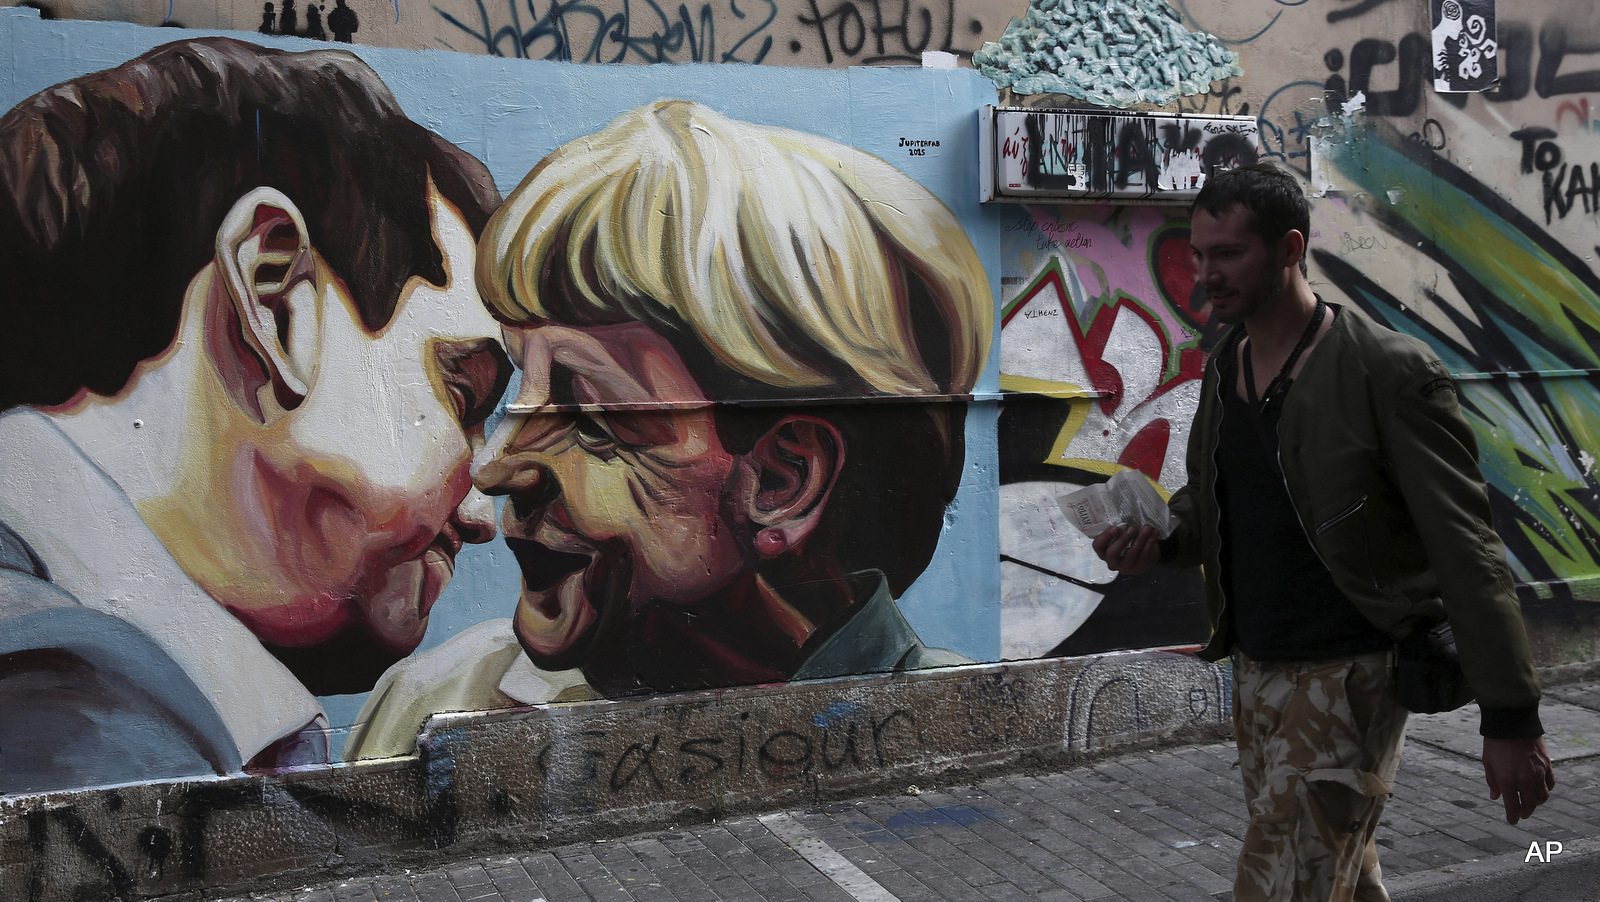 FILE - In this Sunday, Oct. 18, 2015 file photo, a man walks past street art depicting Greek Prime Minister Alexis Tsipras and German Chancellor Angela Merkel in Athens, Greece. Tsipras' decision to sign off on a bailout led to many in his left-wing Syriza party to quit in protest.